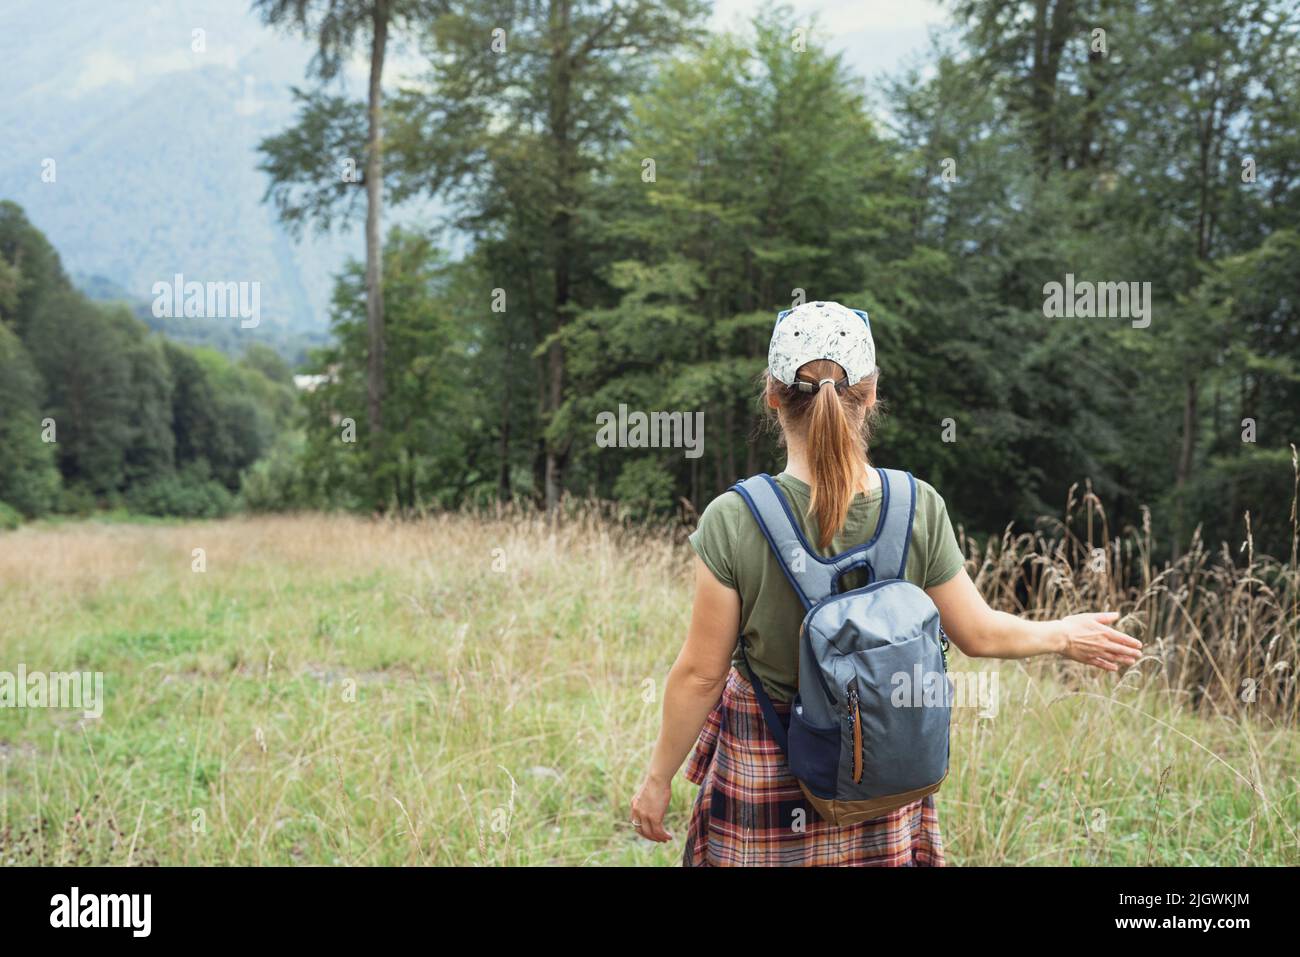 Rear view of a young woman in a cap with a backpack walking in the forest highlands in the summer and touching a growing plant enjoying nature selecti Stock Photo